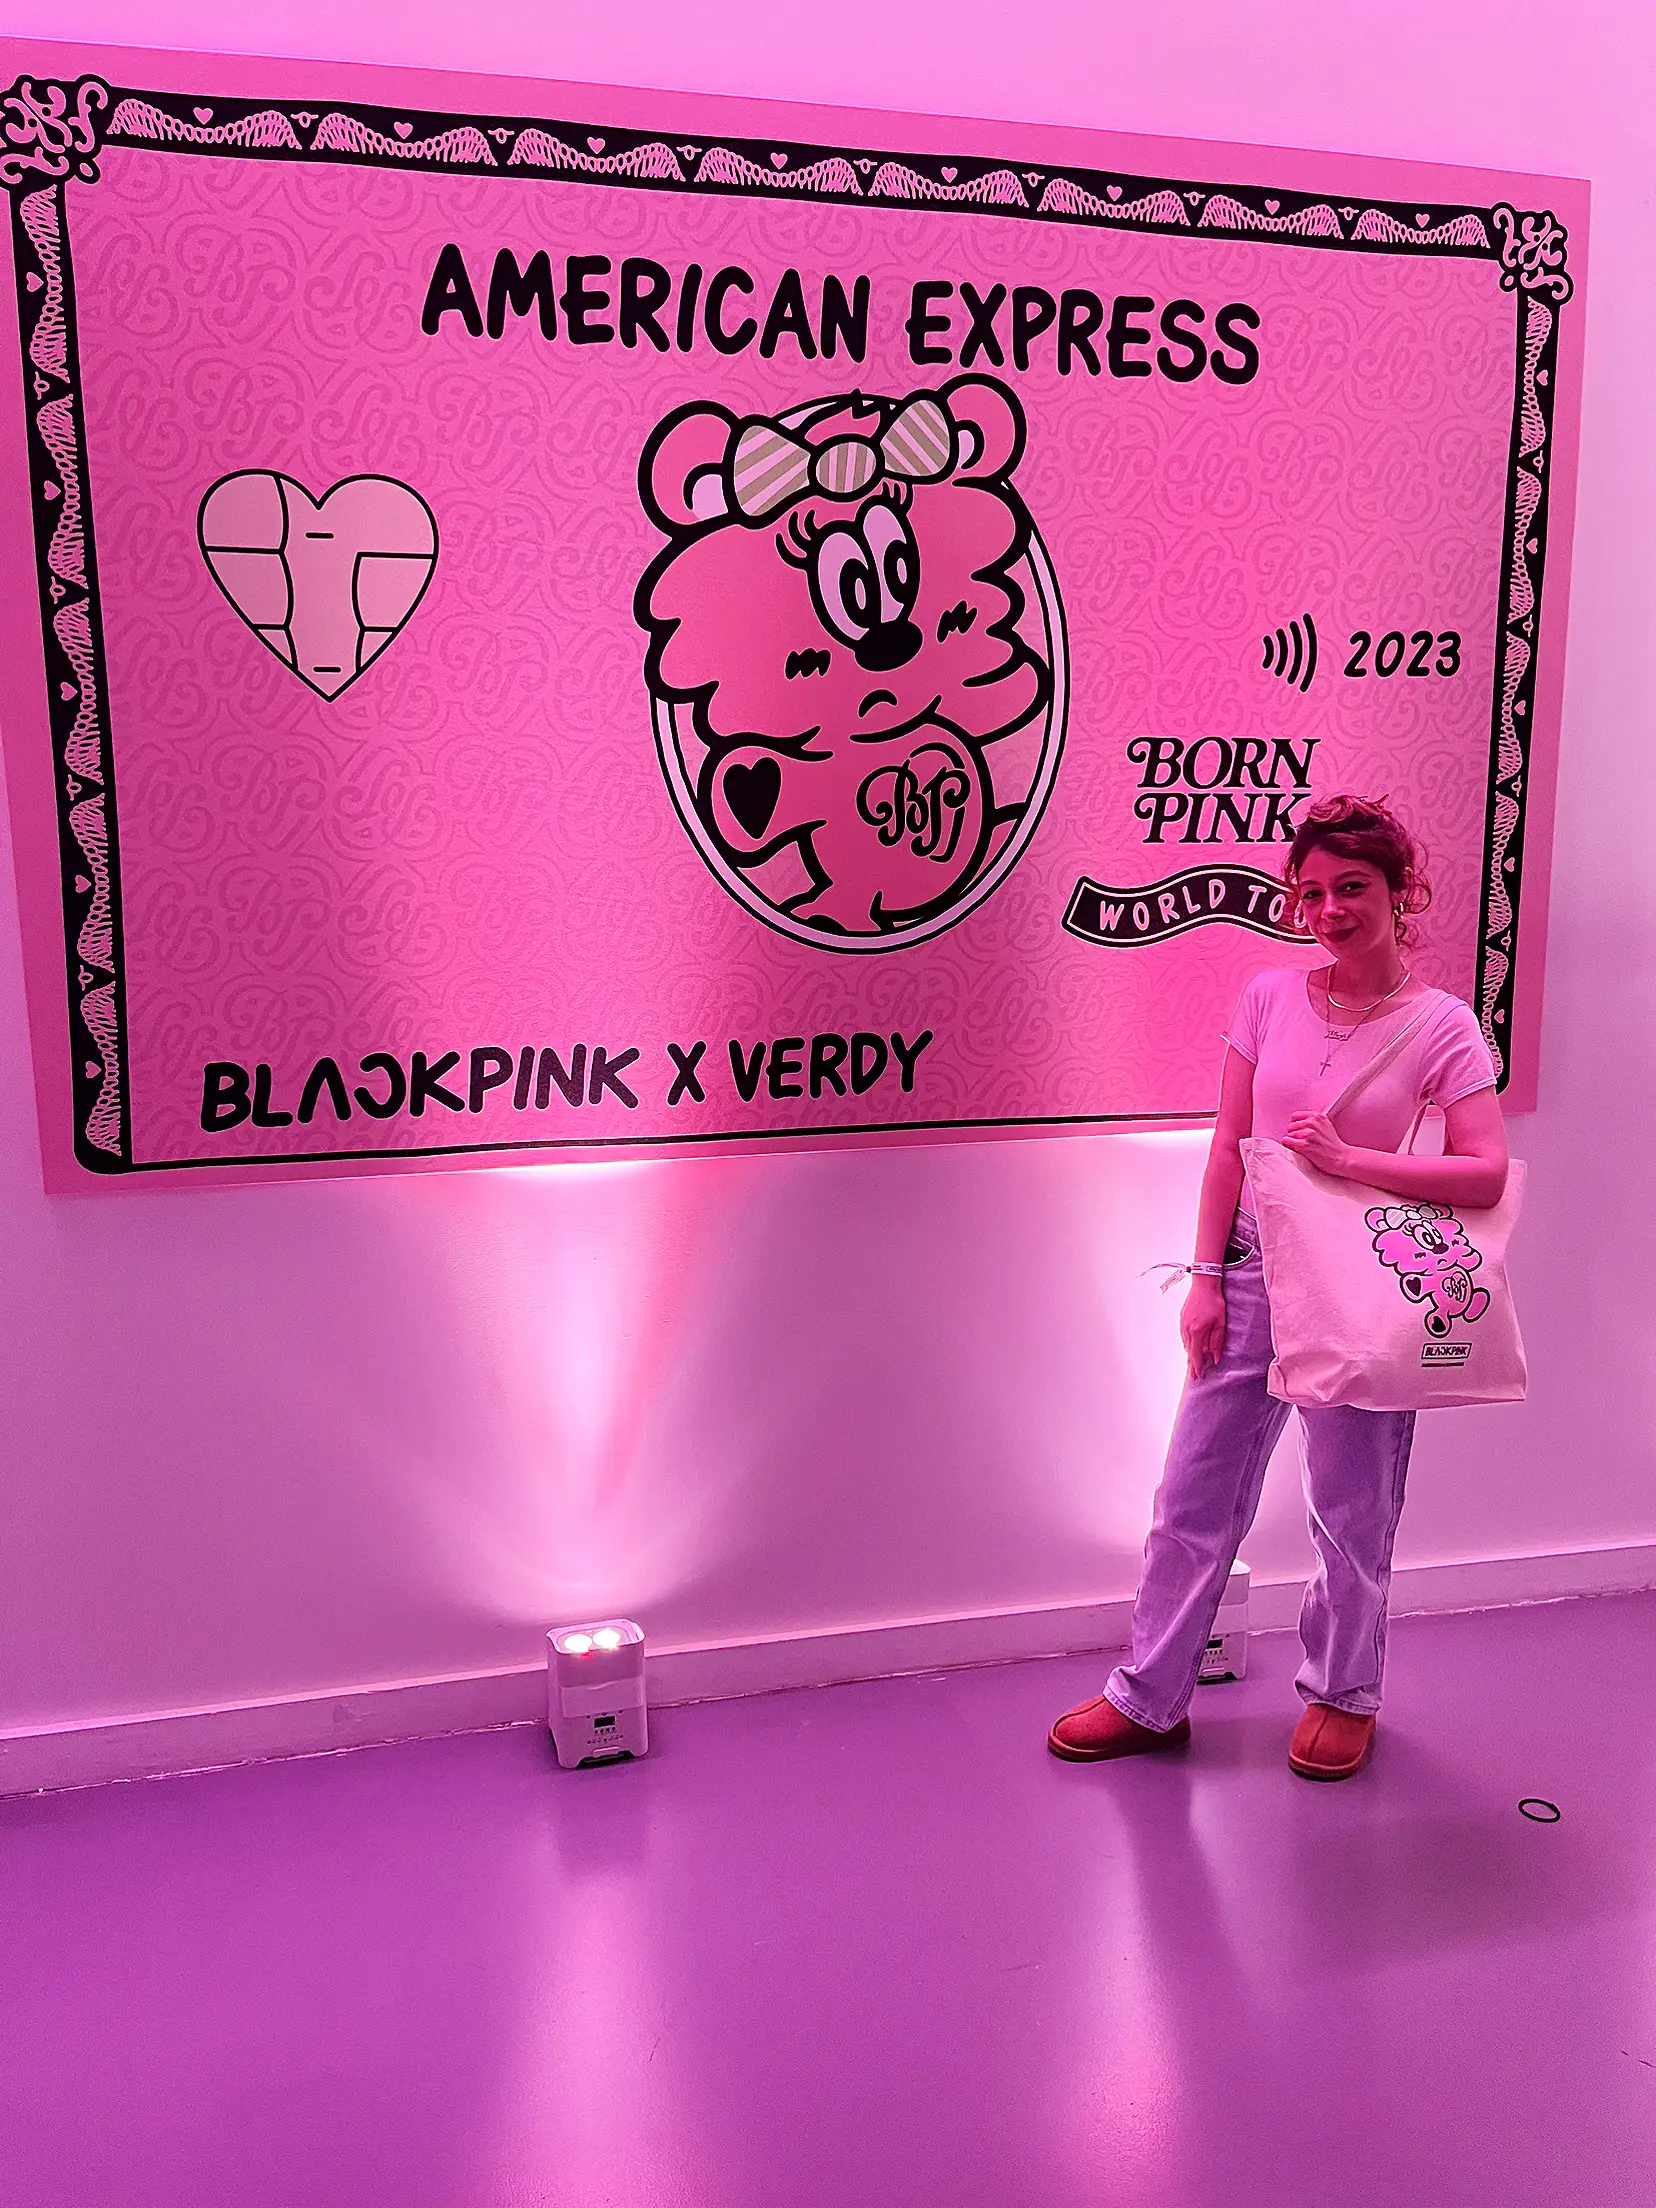 Blackpink x American Express x Verdy | Gallery posted by Alex S 